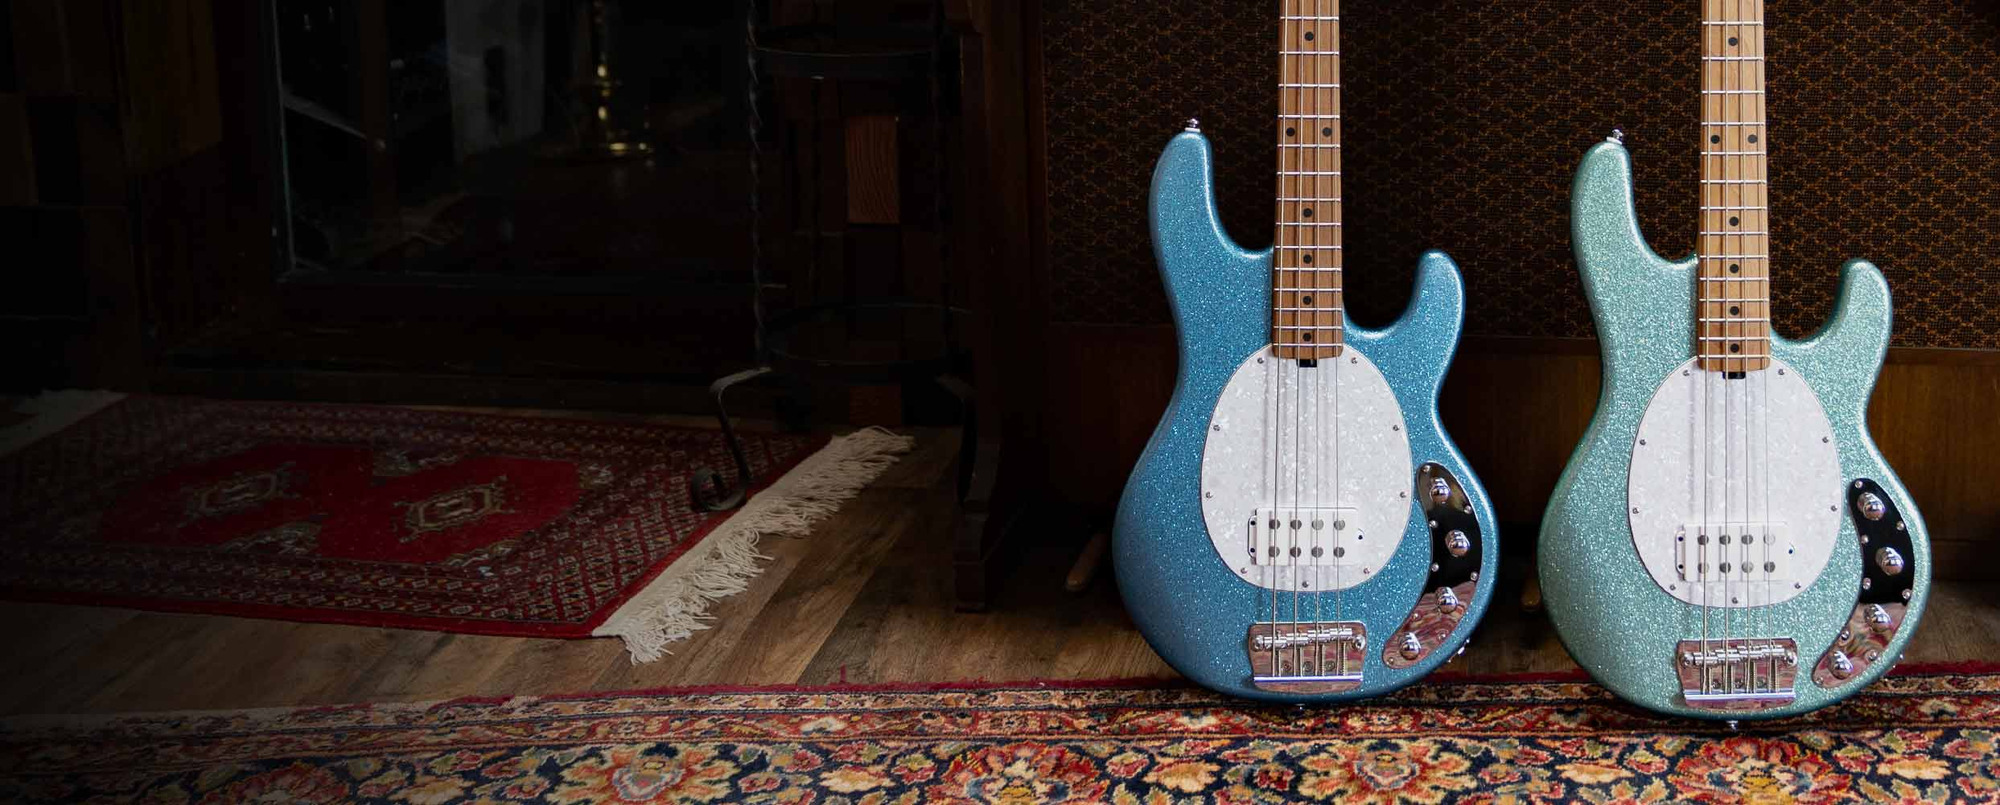 The StingRay Ray35 bass in Ash resting on a vintage chair.